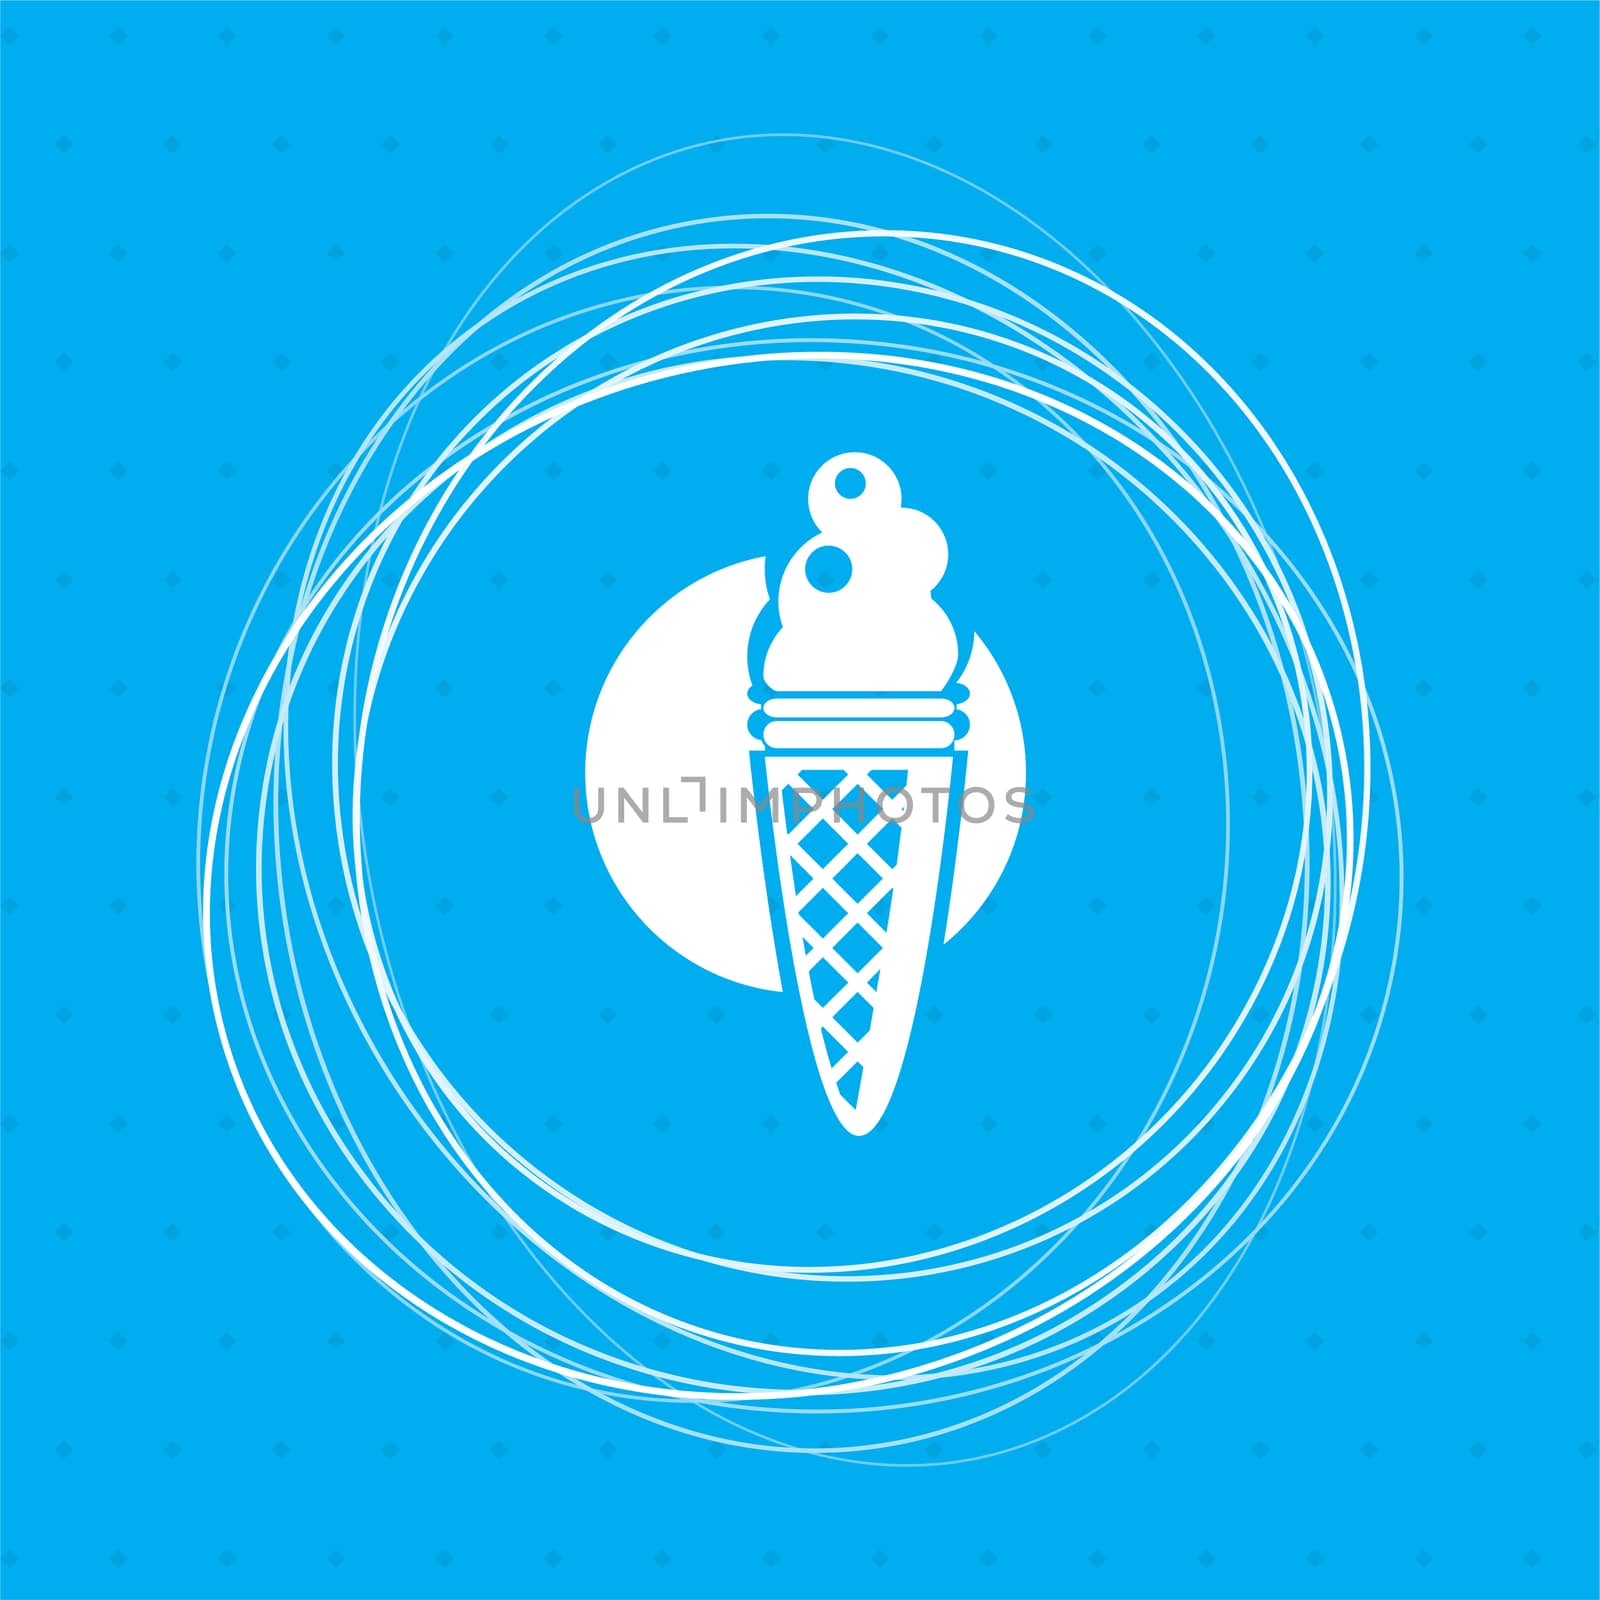 Ice Cream icon on a blue background with abstract circles around and place for your text. illustration